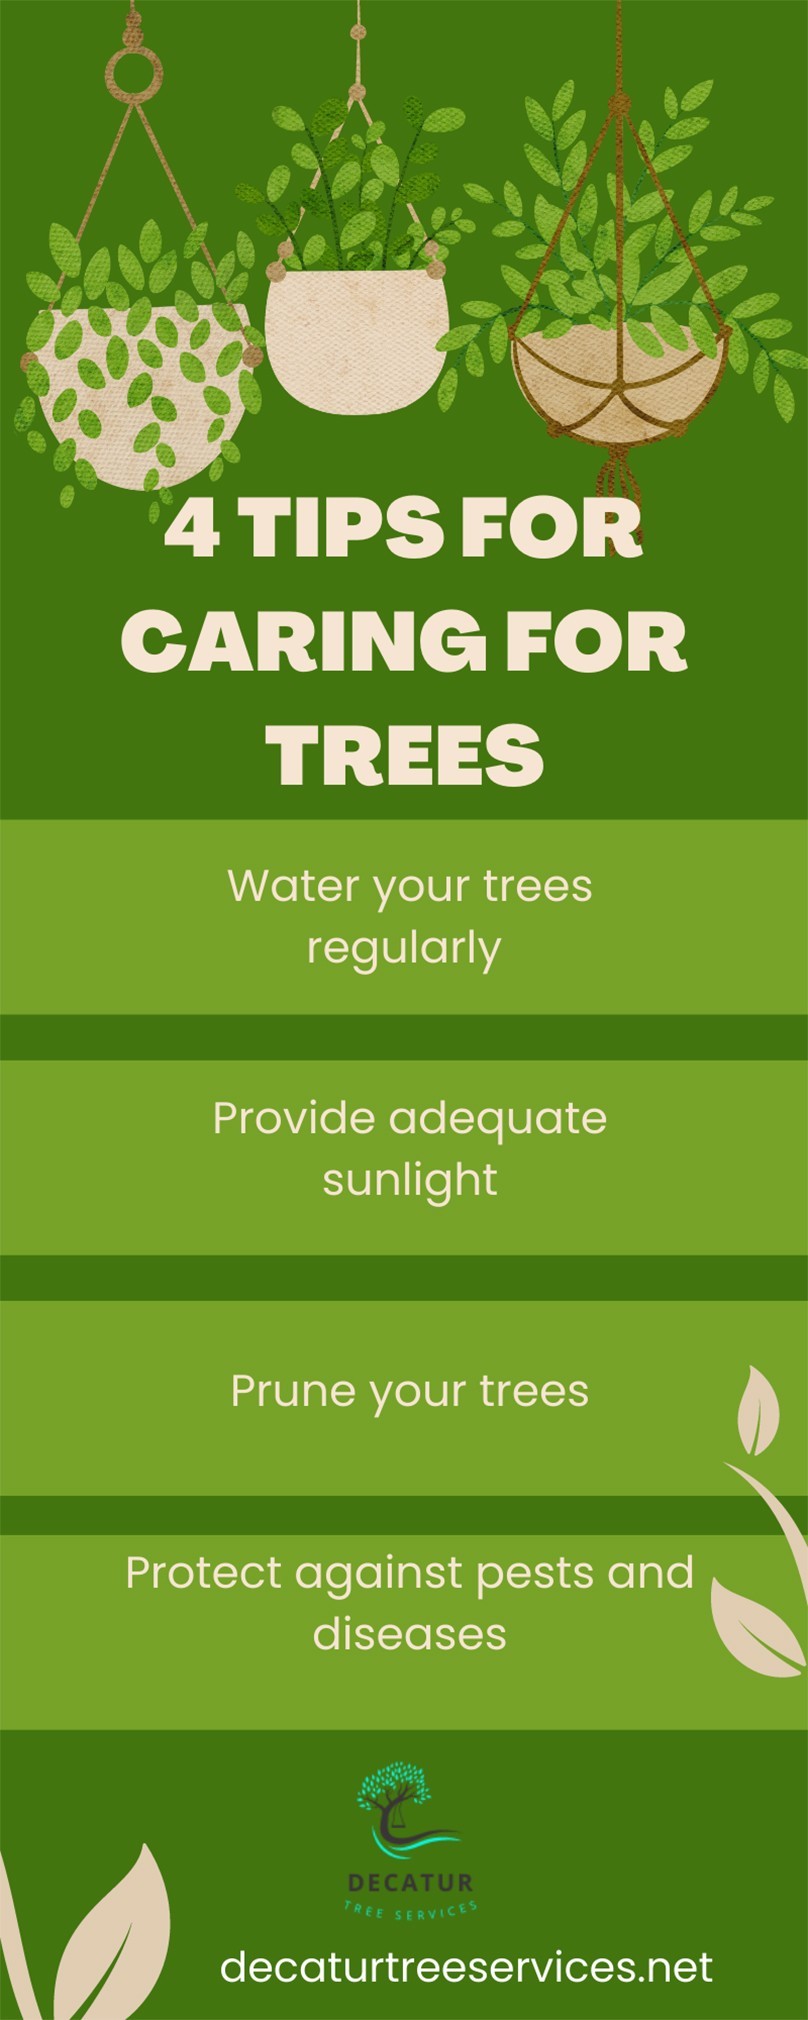 4 Tips for Caring for Trees [Infographic]